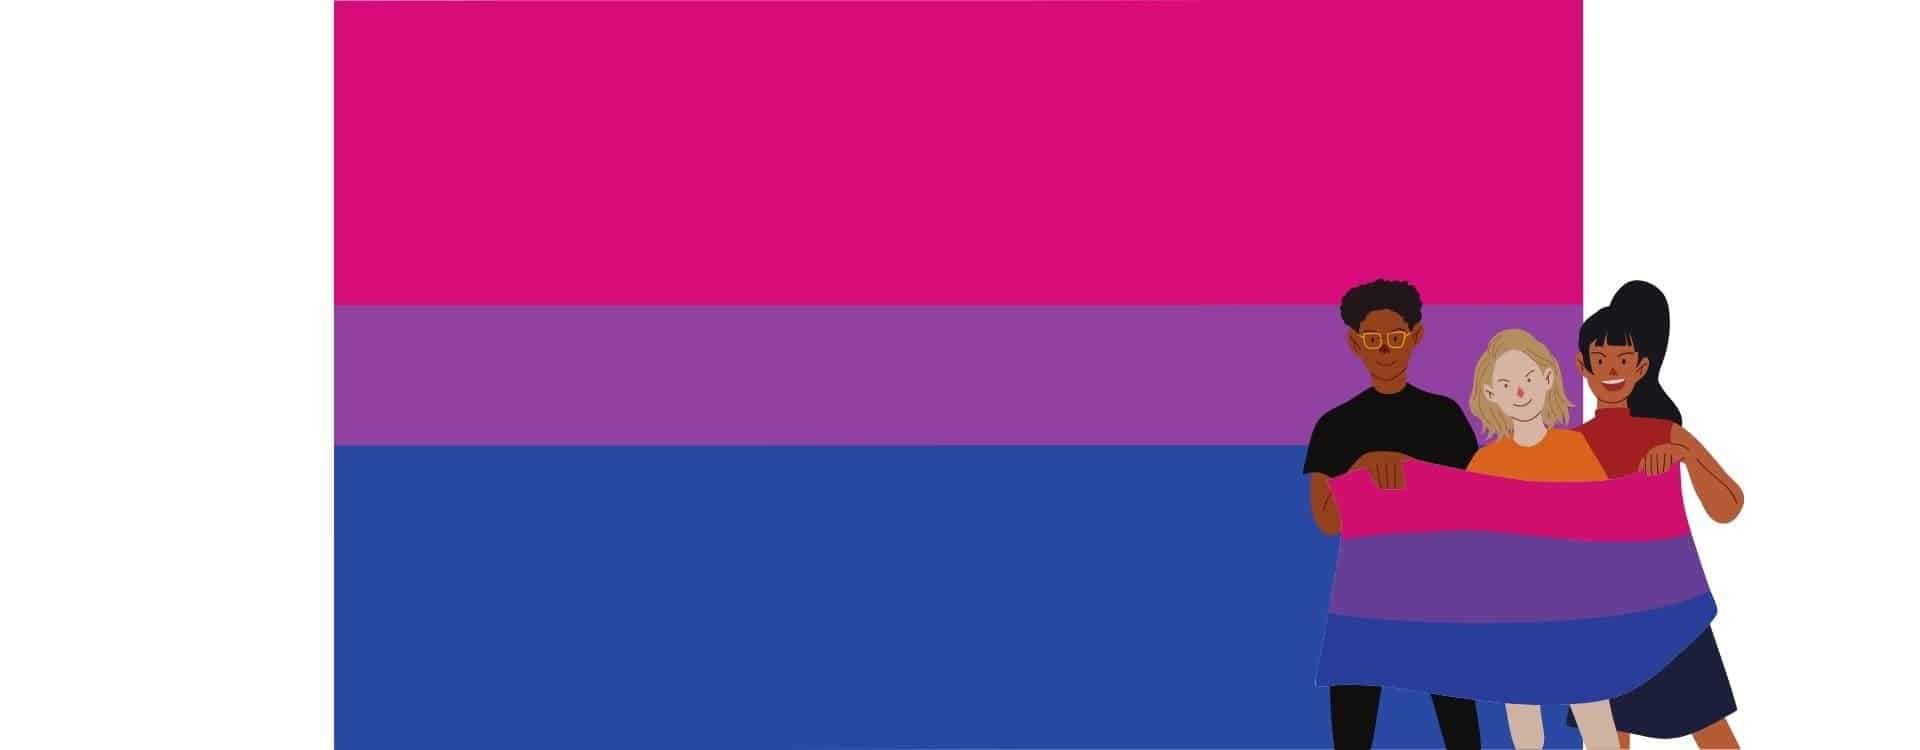 Bisexual - the LGBT flag